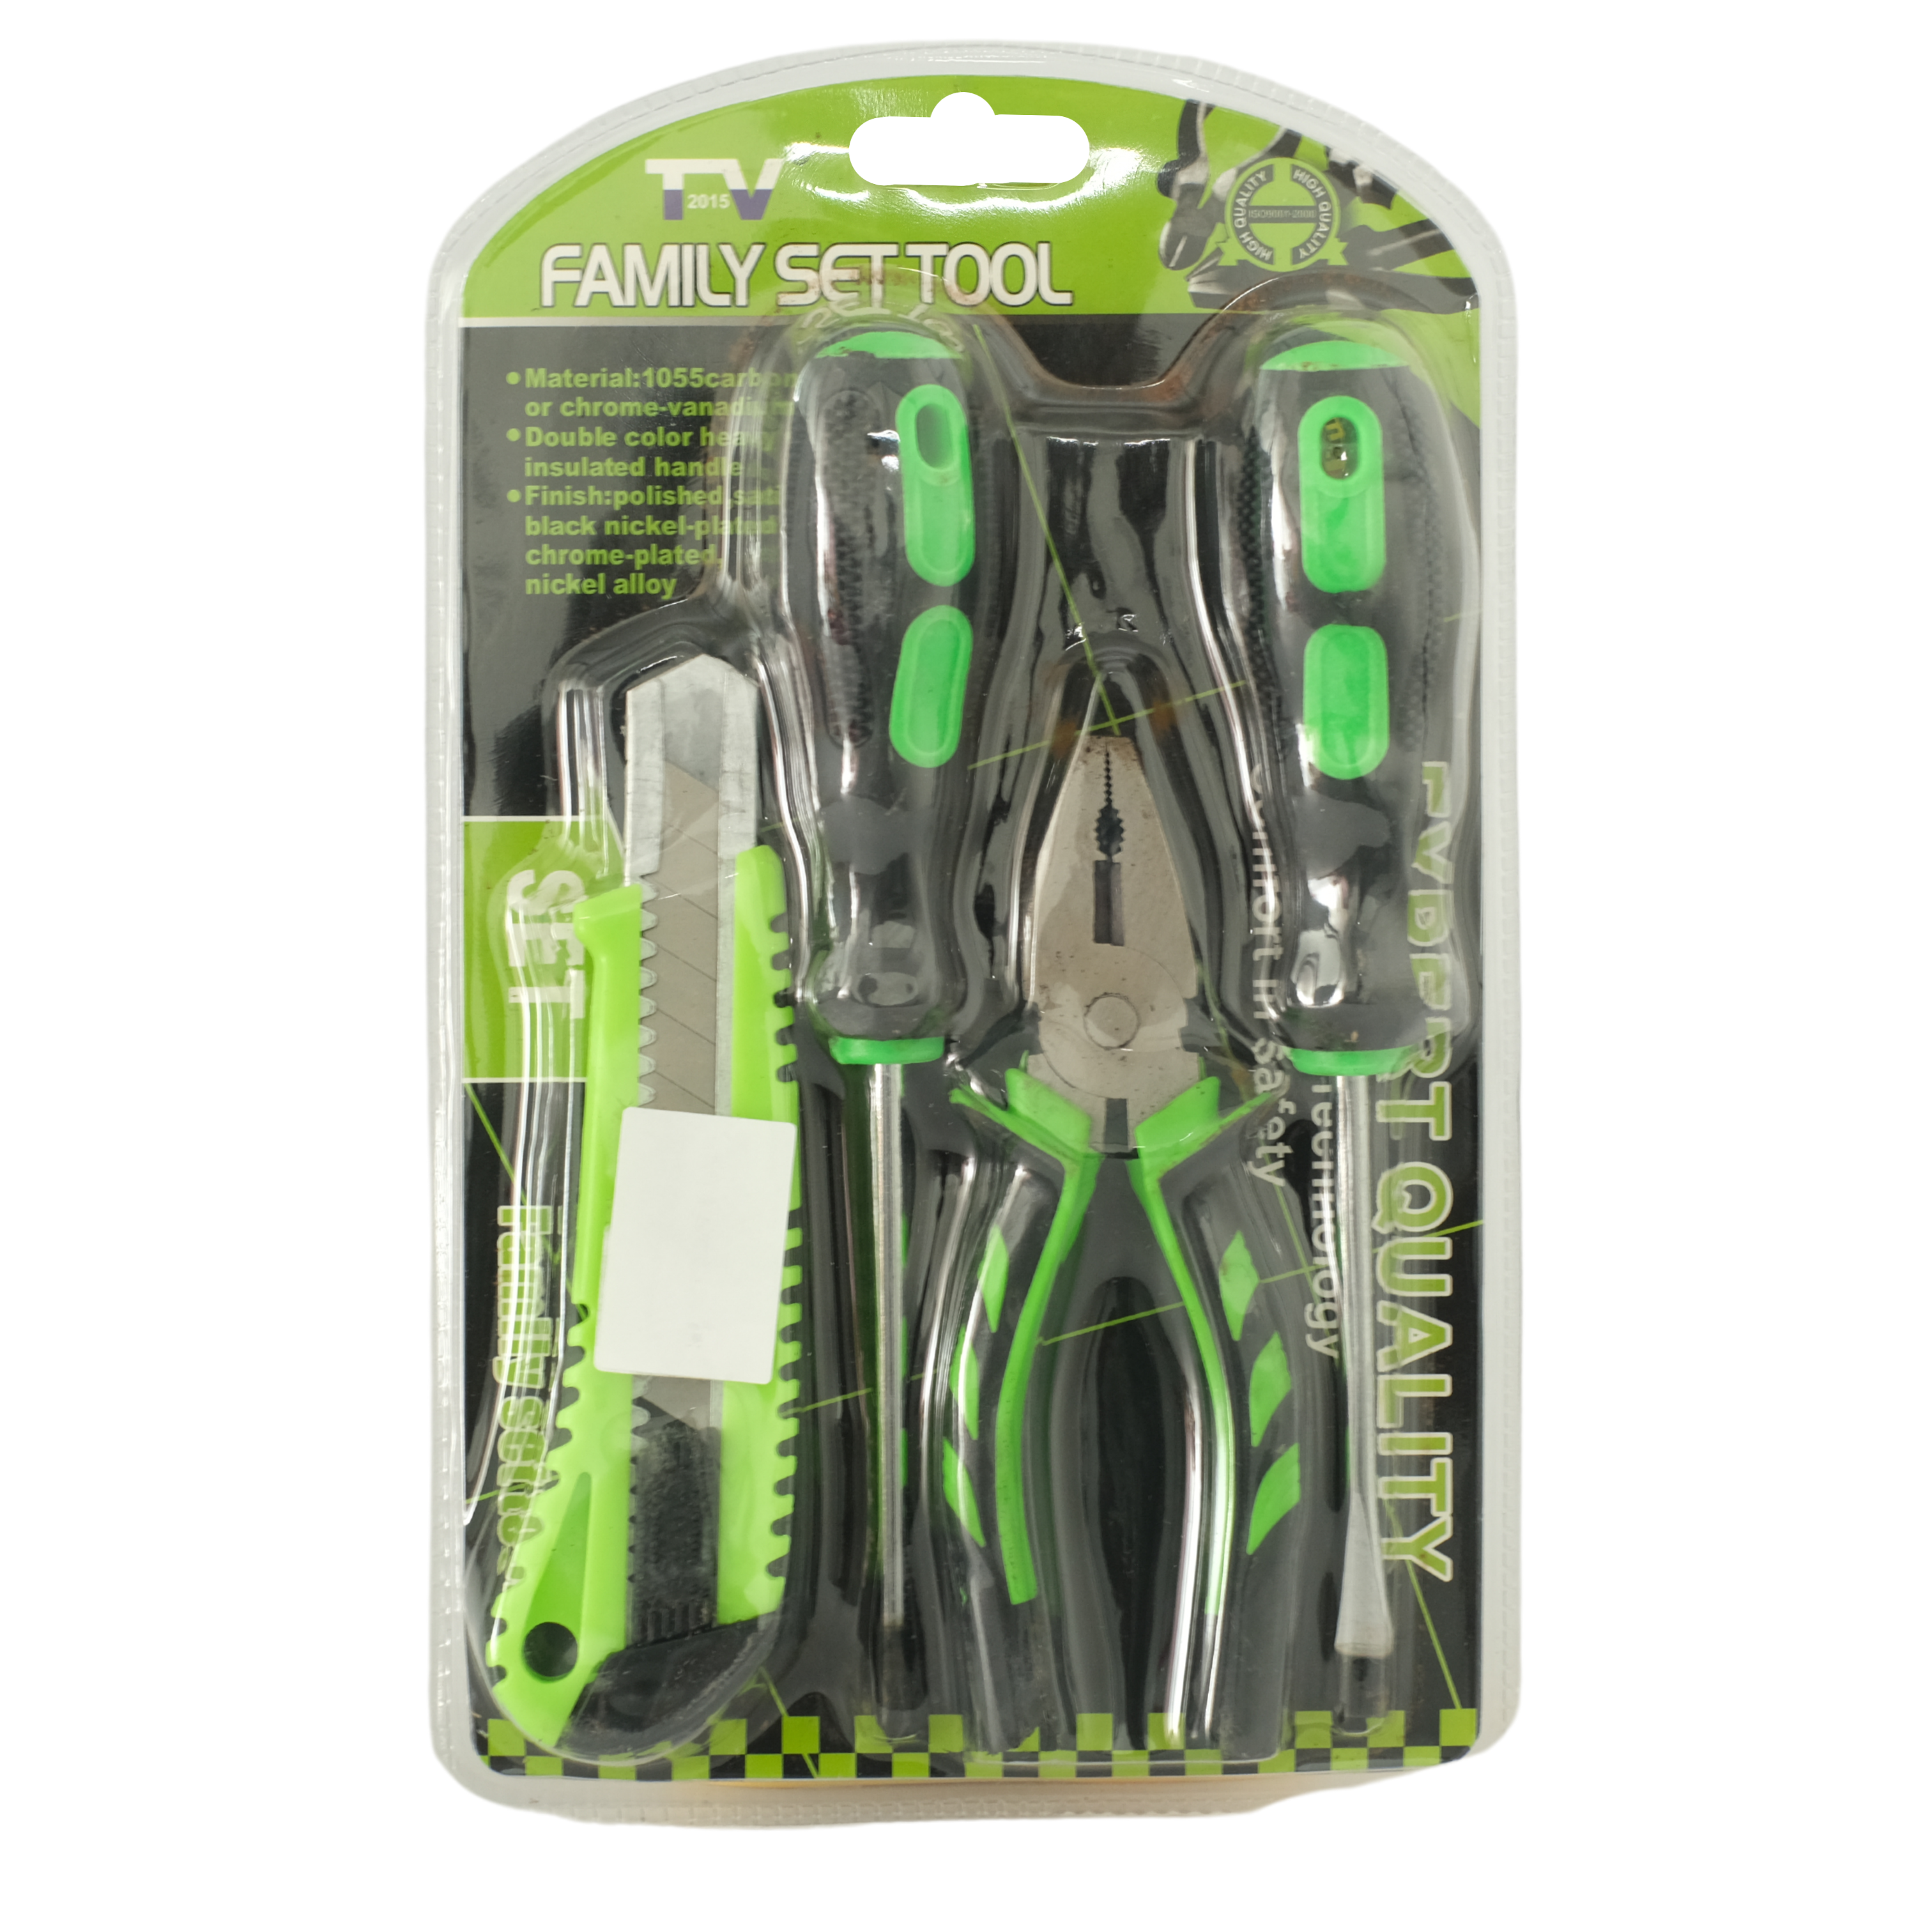 GREGORY'S- PLIER, SCREW DRIVER AND PAPER CUTTER SET 4 PCS